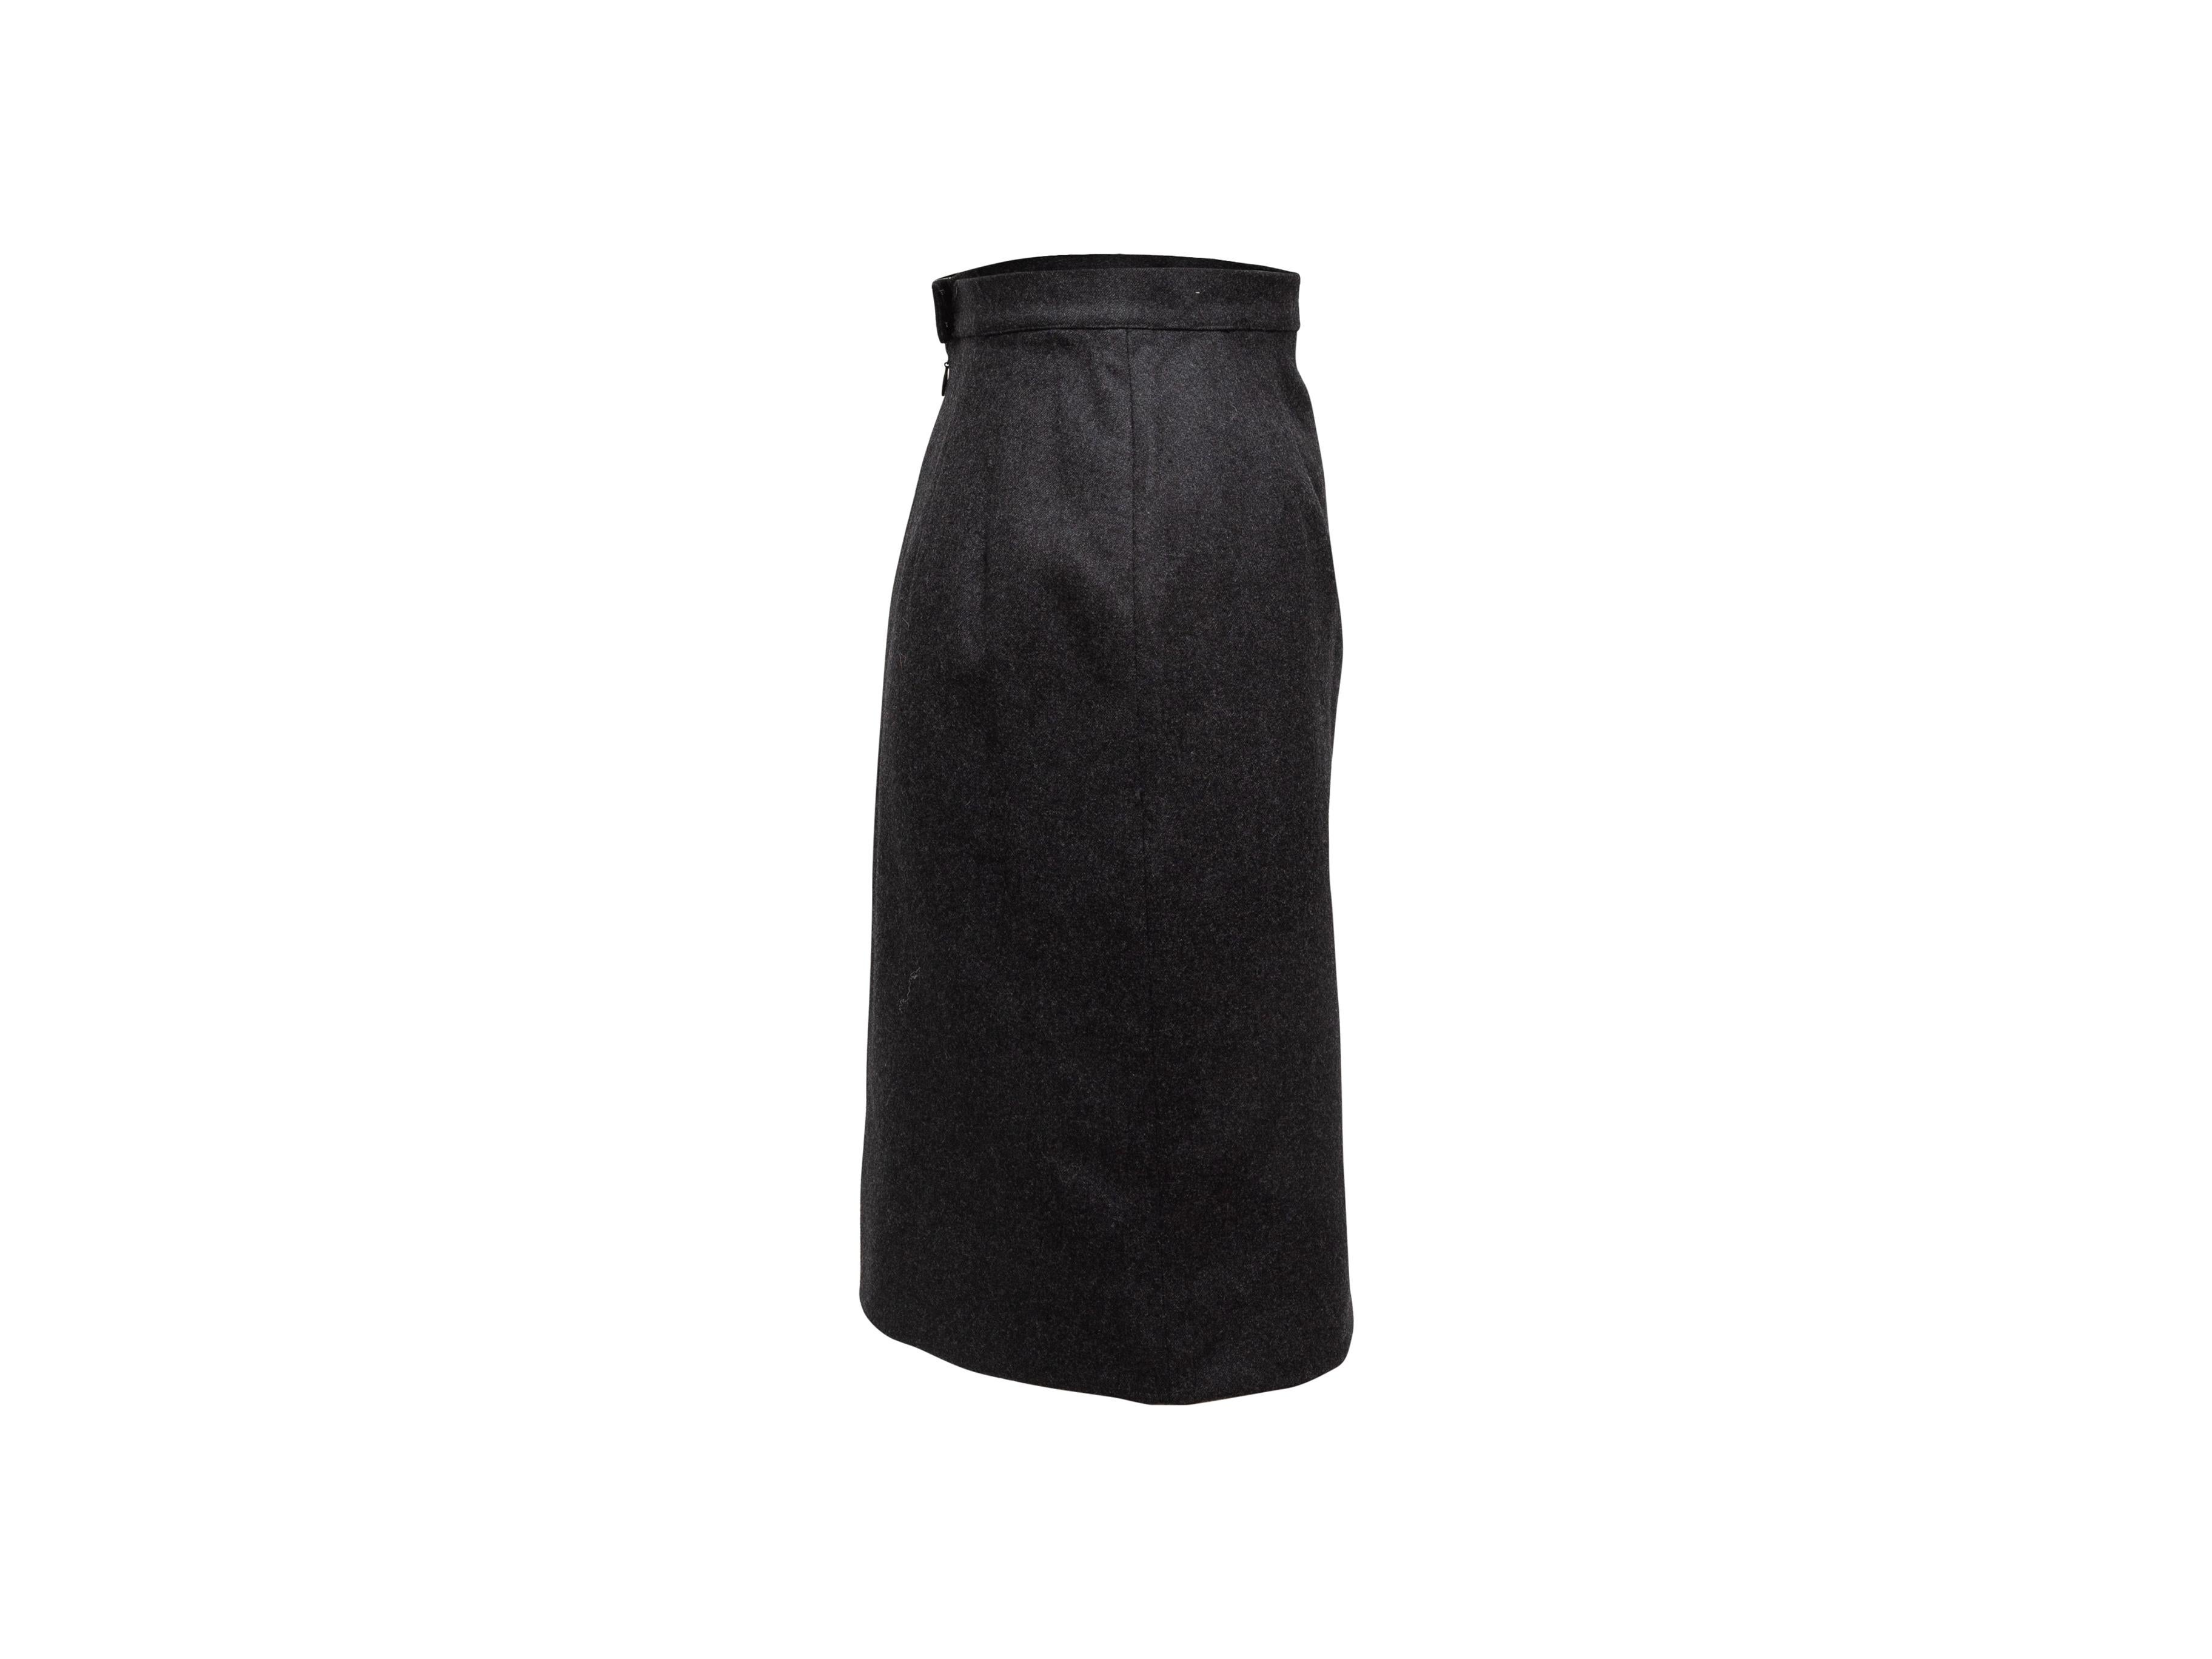 Product details: Vintage dark grey wool pencil skirt by Chanel Boutique. Concealed zip and gold-tone CC button closures at center back. Designer size 36. 25